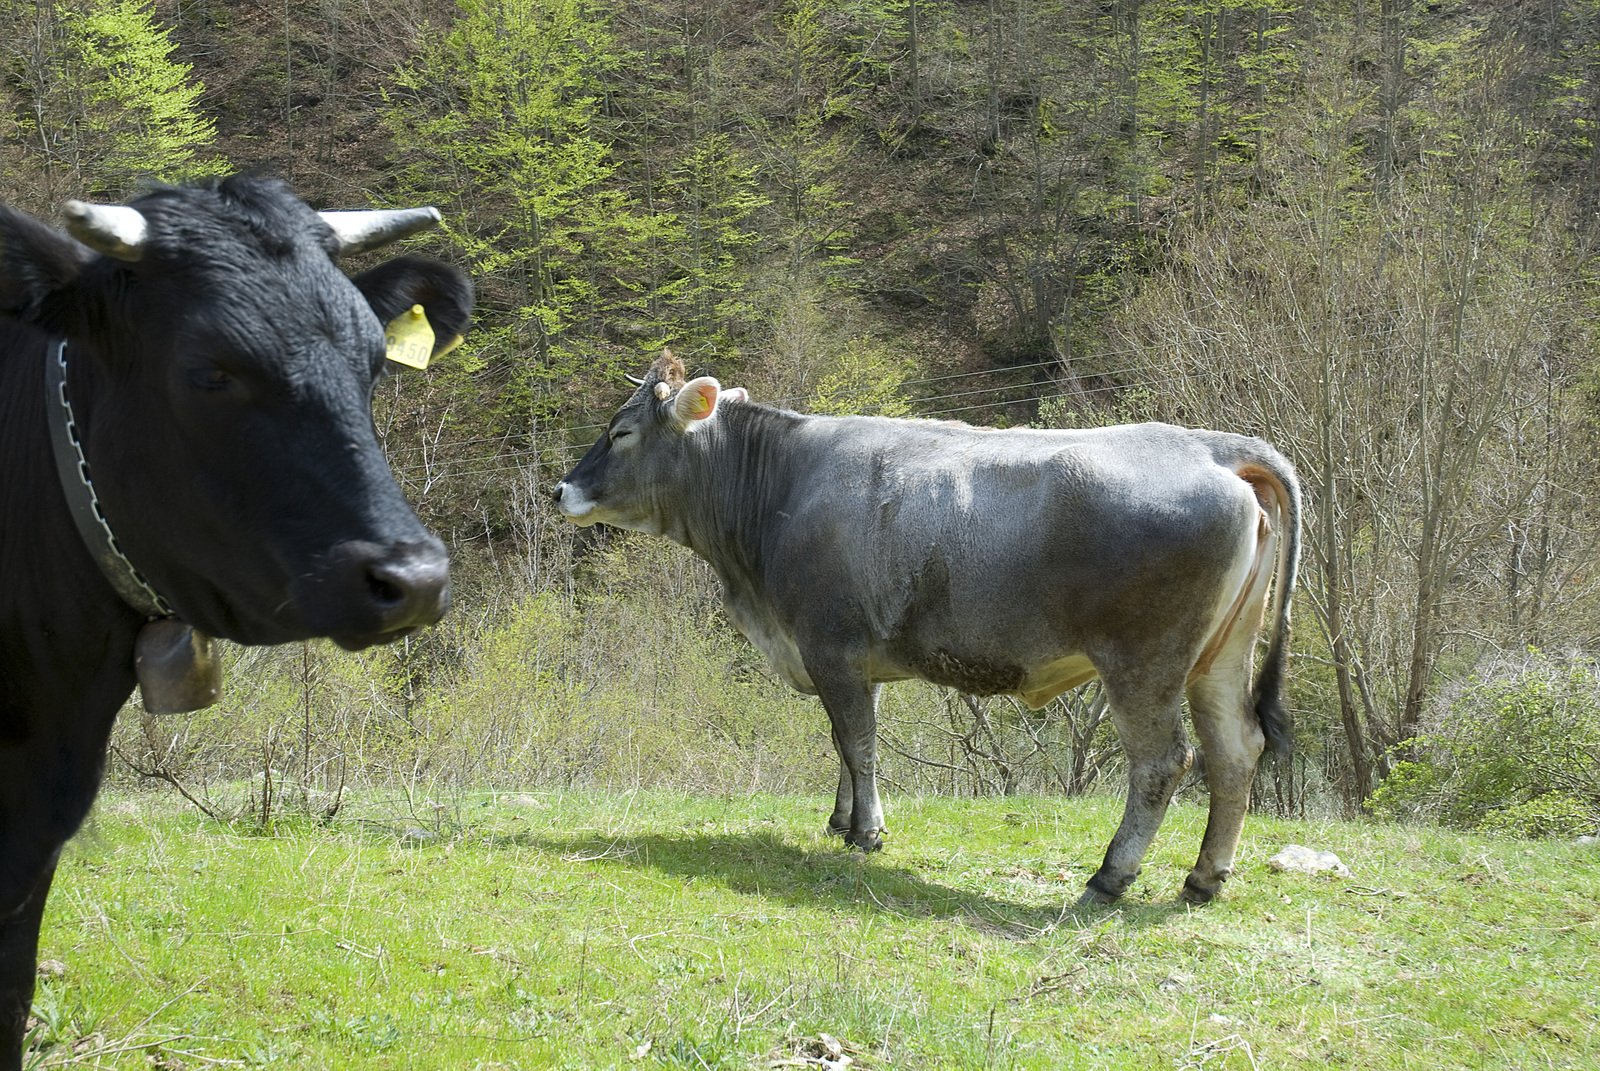 two cows standing together in the grass outside